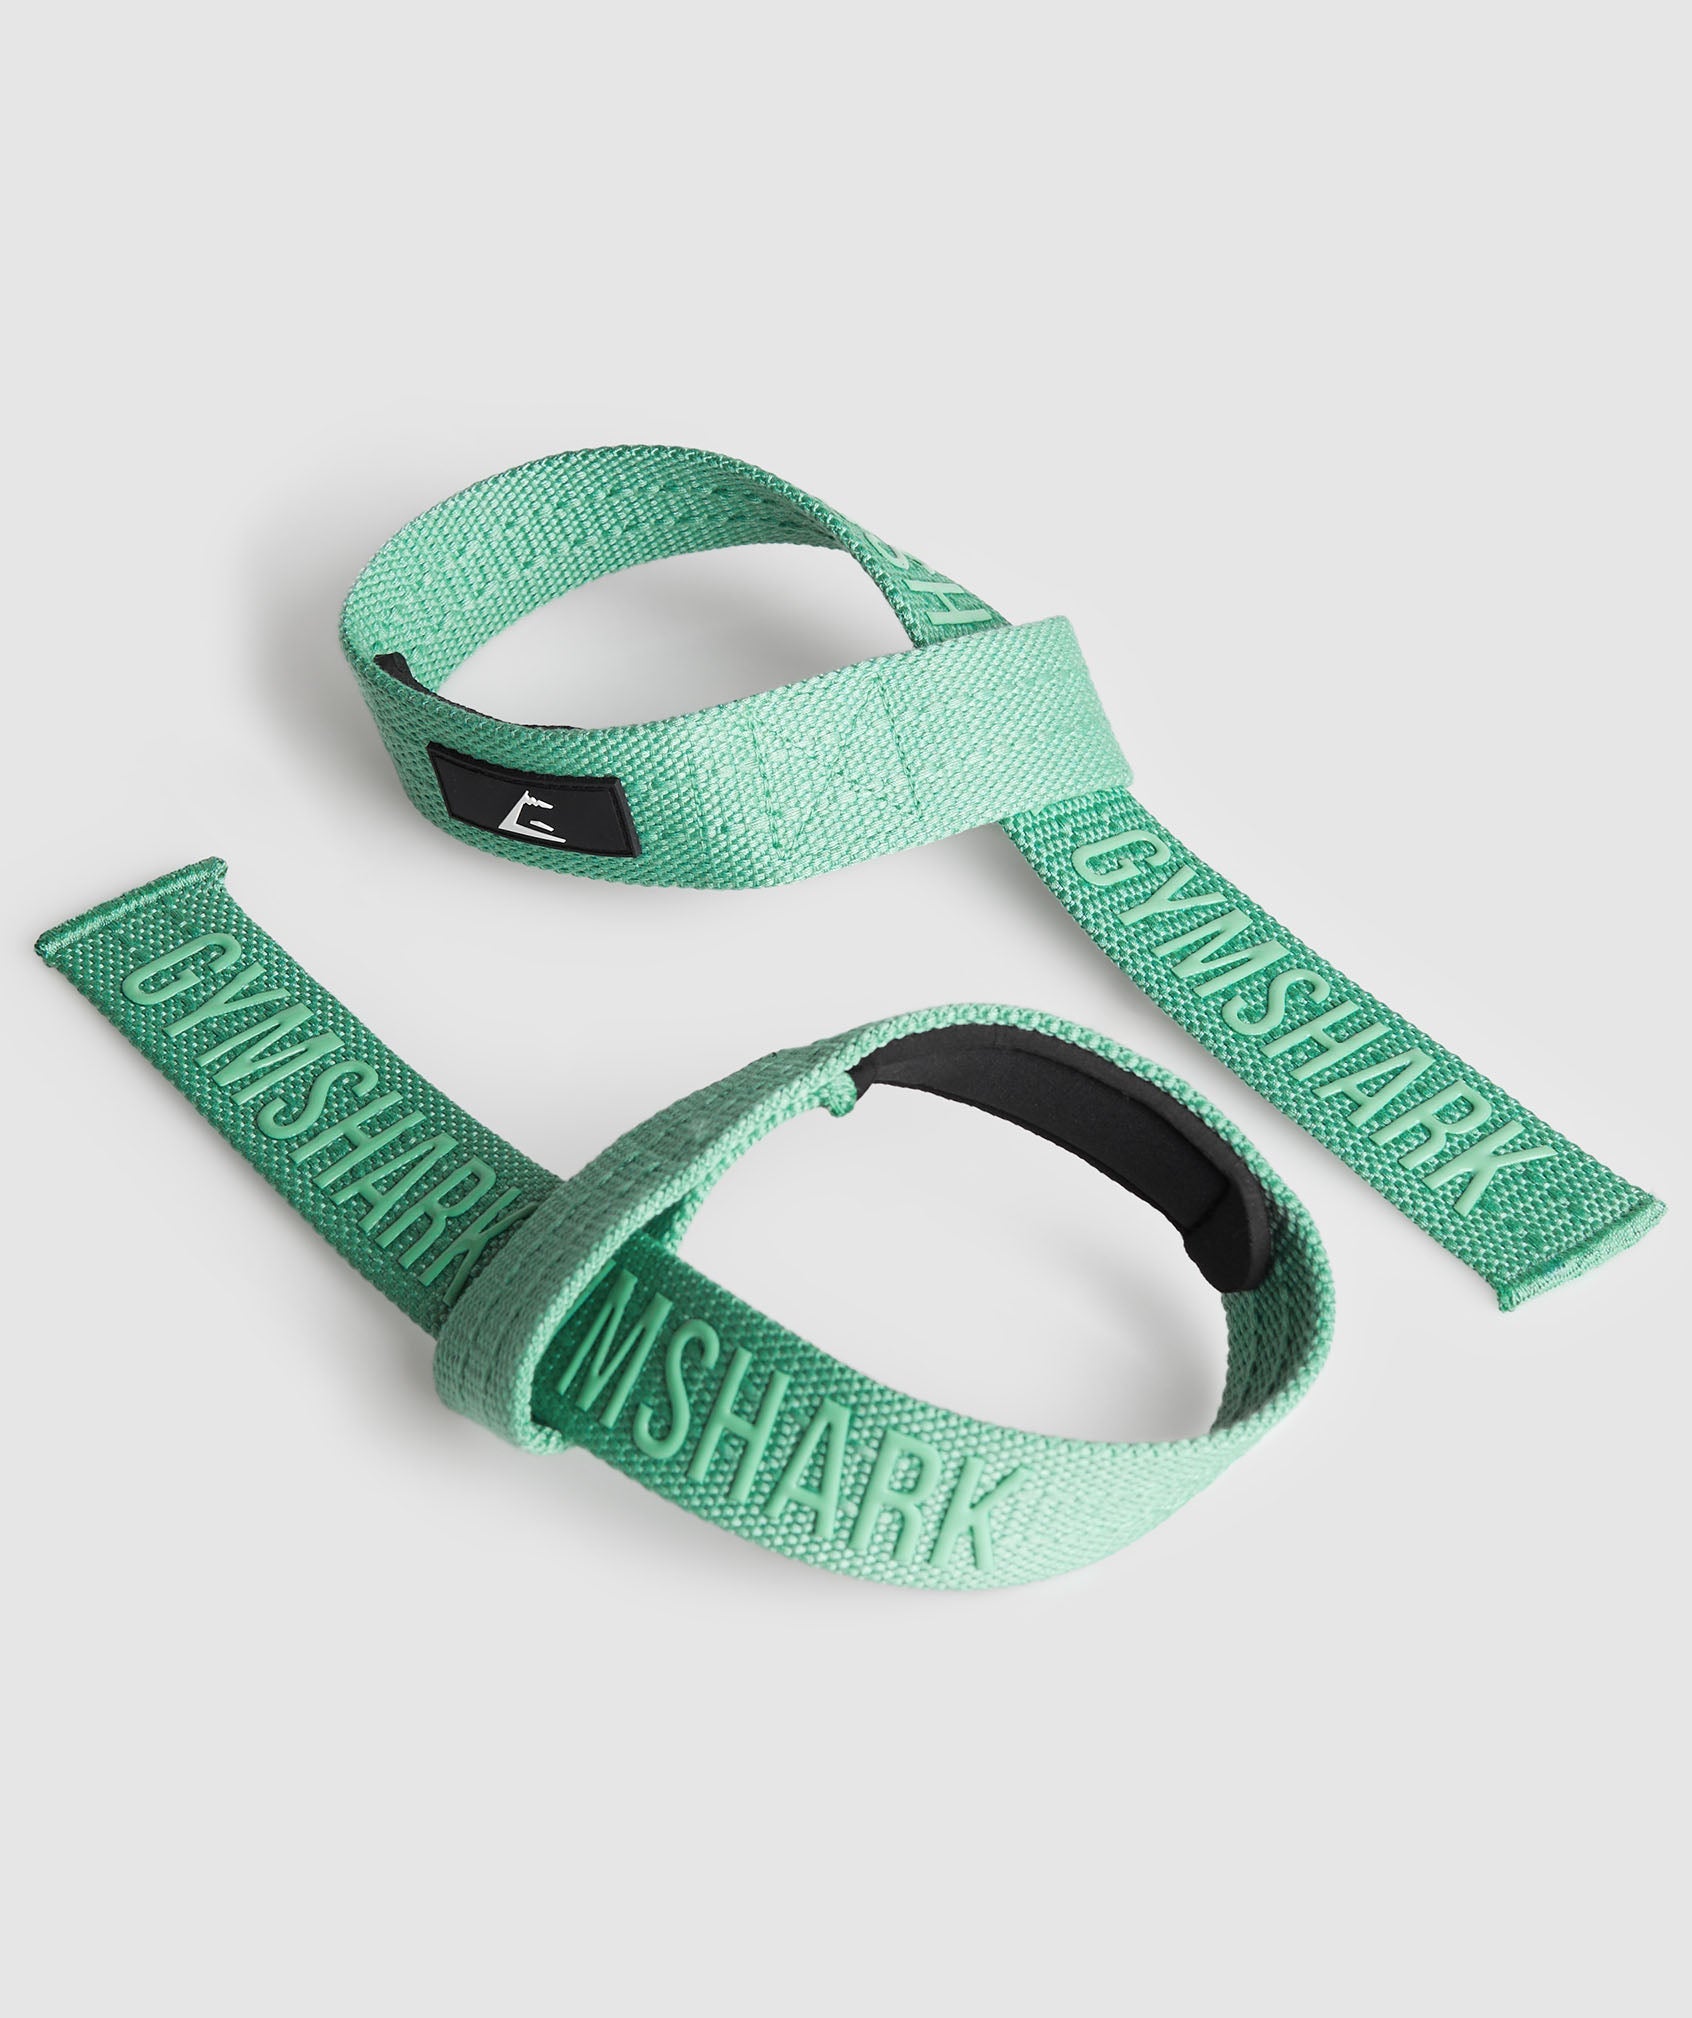 Silicone Lifting Straps in Lagoon Green is out of stock